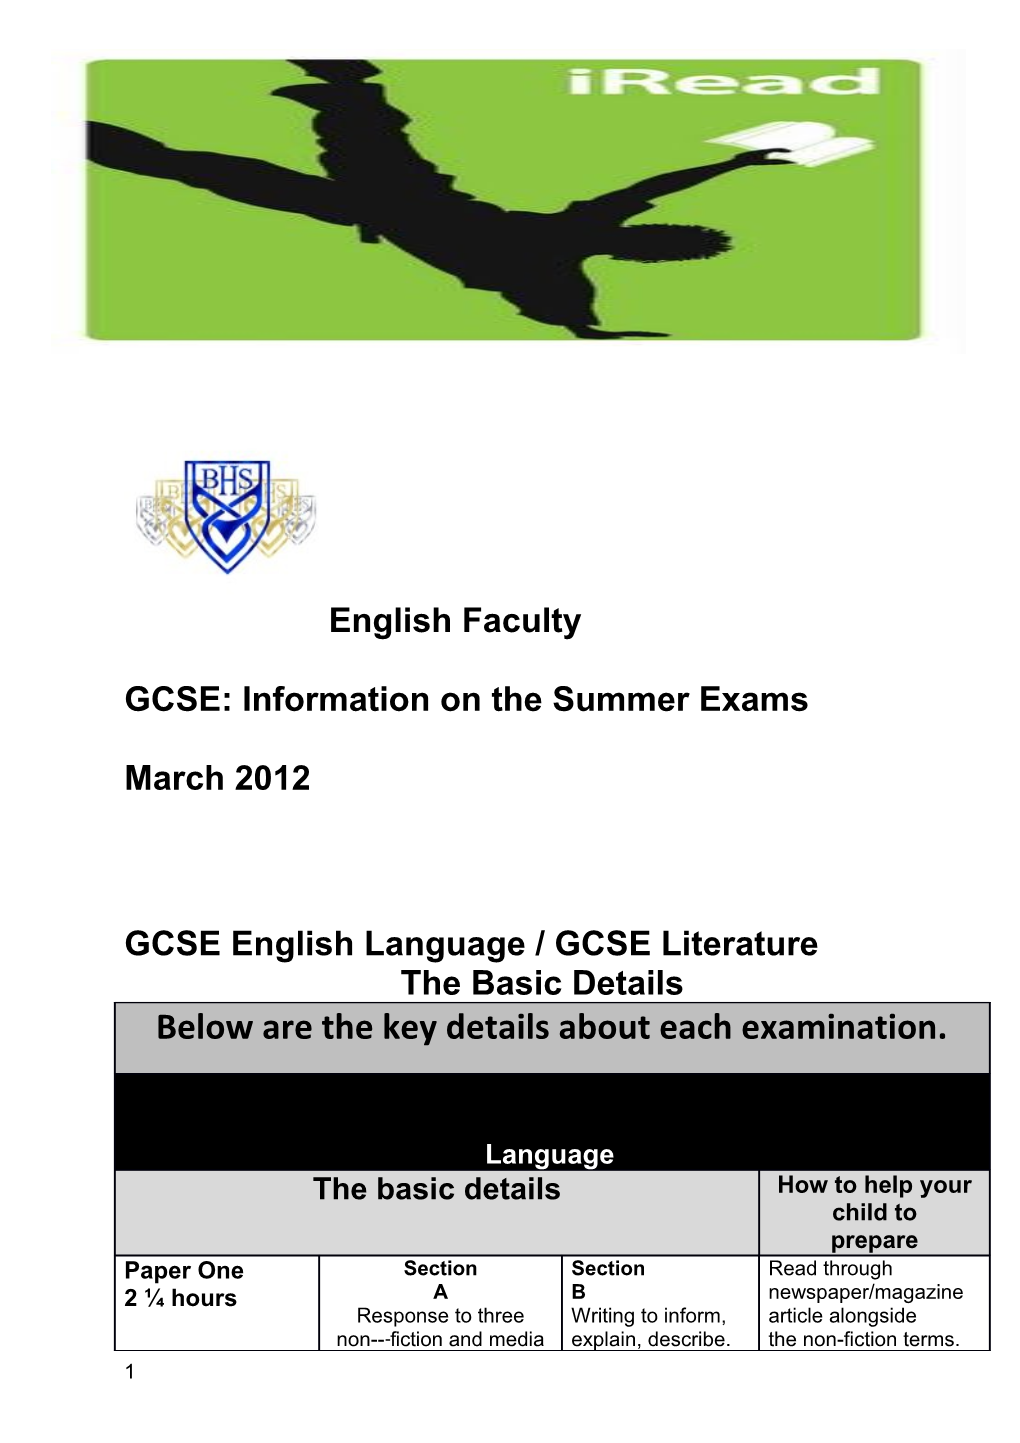 GCSE: Information on the Summer Exams